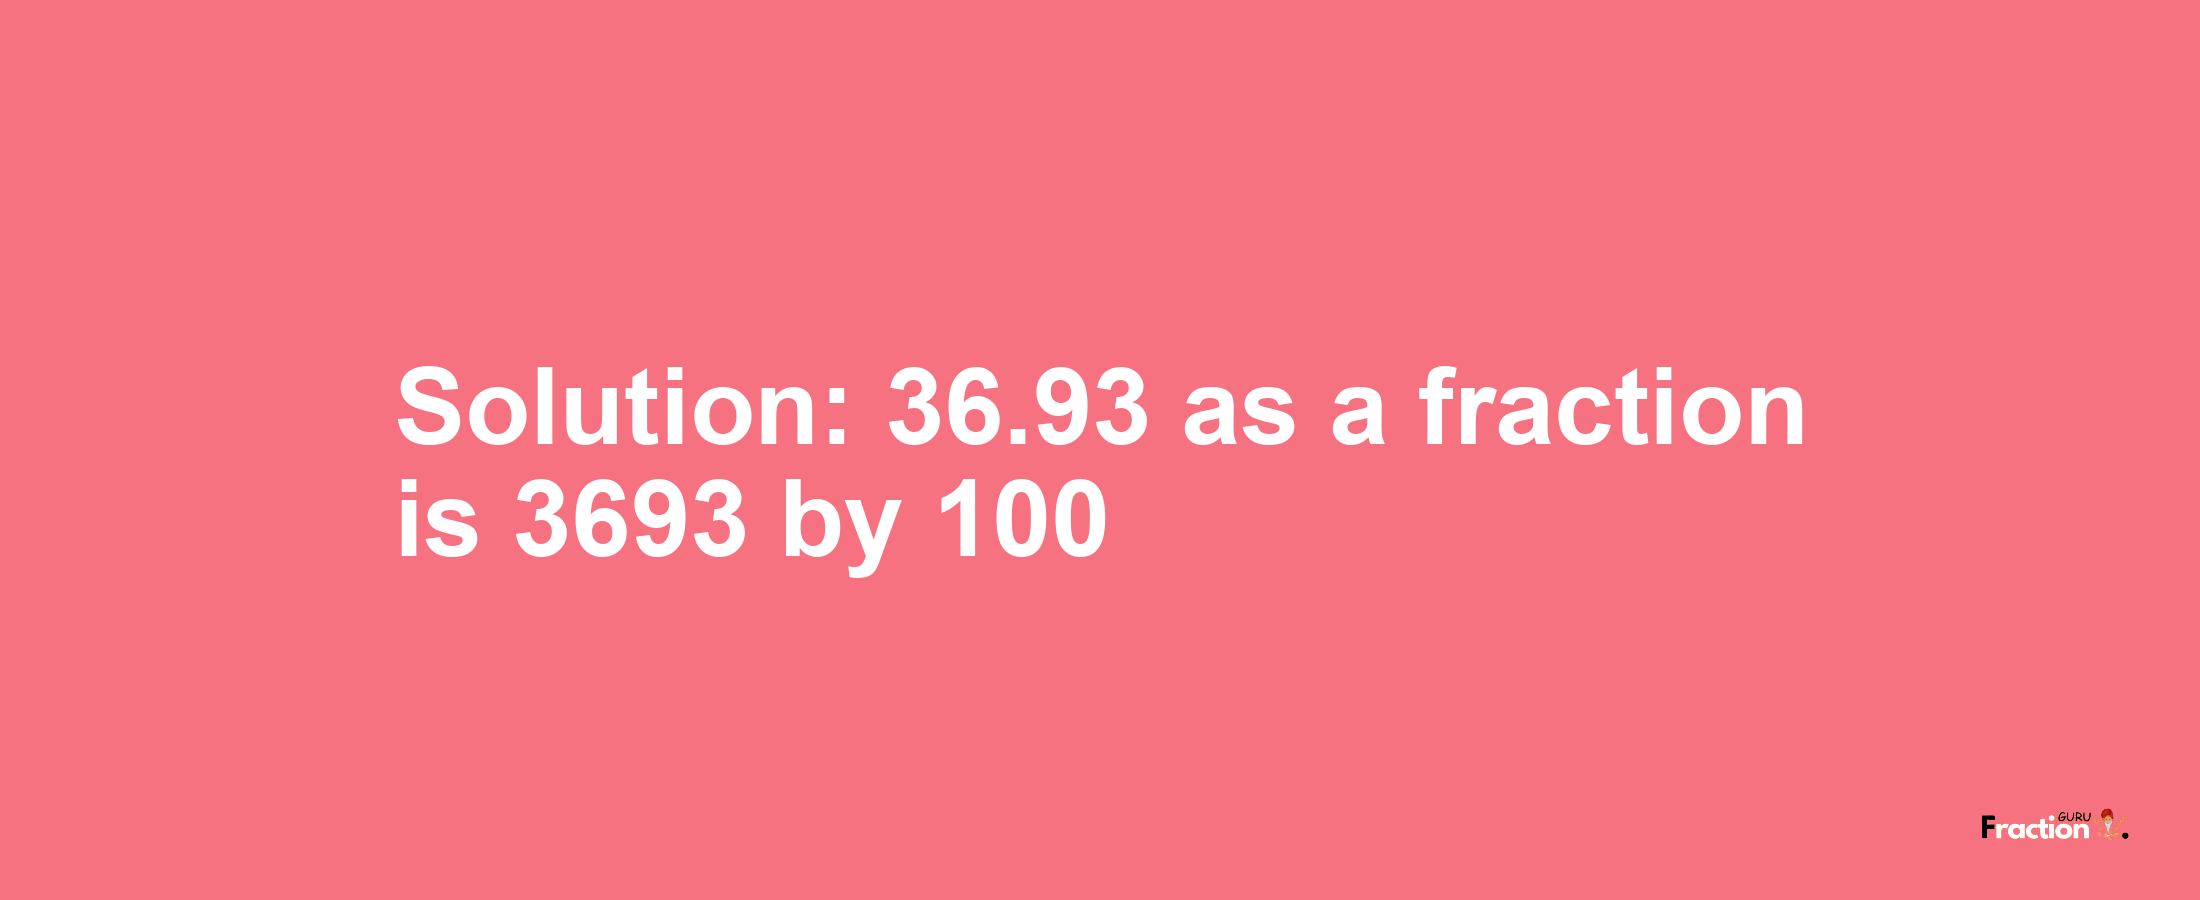 Solution:36.93 as a fraction is 3693/100